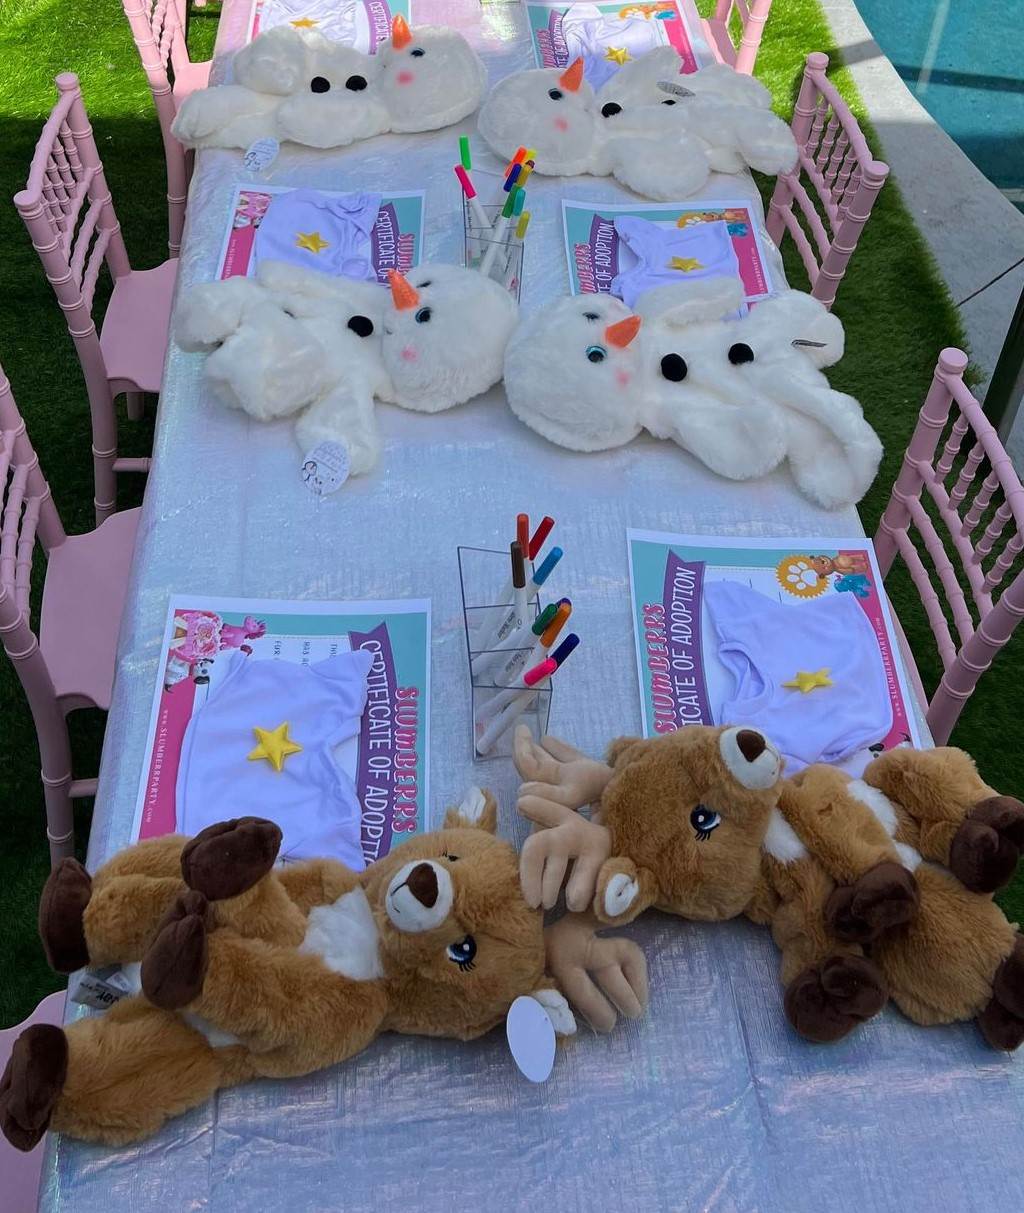 Children's party table set up with stuffed bears, fluffy cloud mats, coloring materials, and kids' activity sheets.